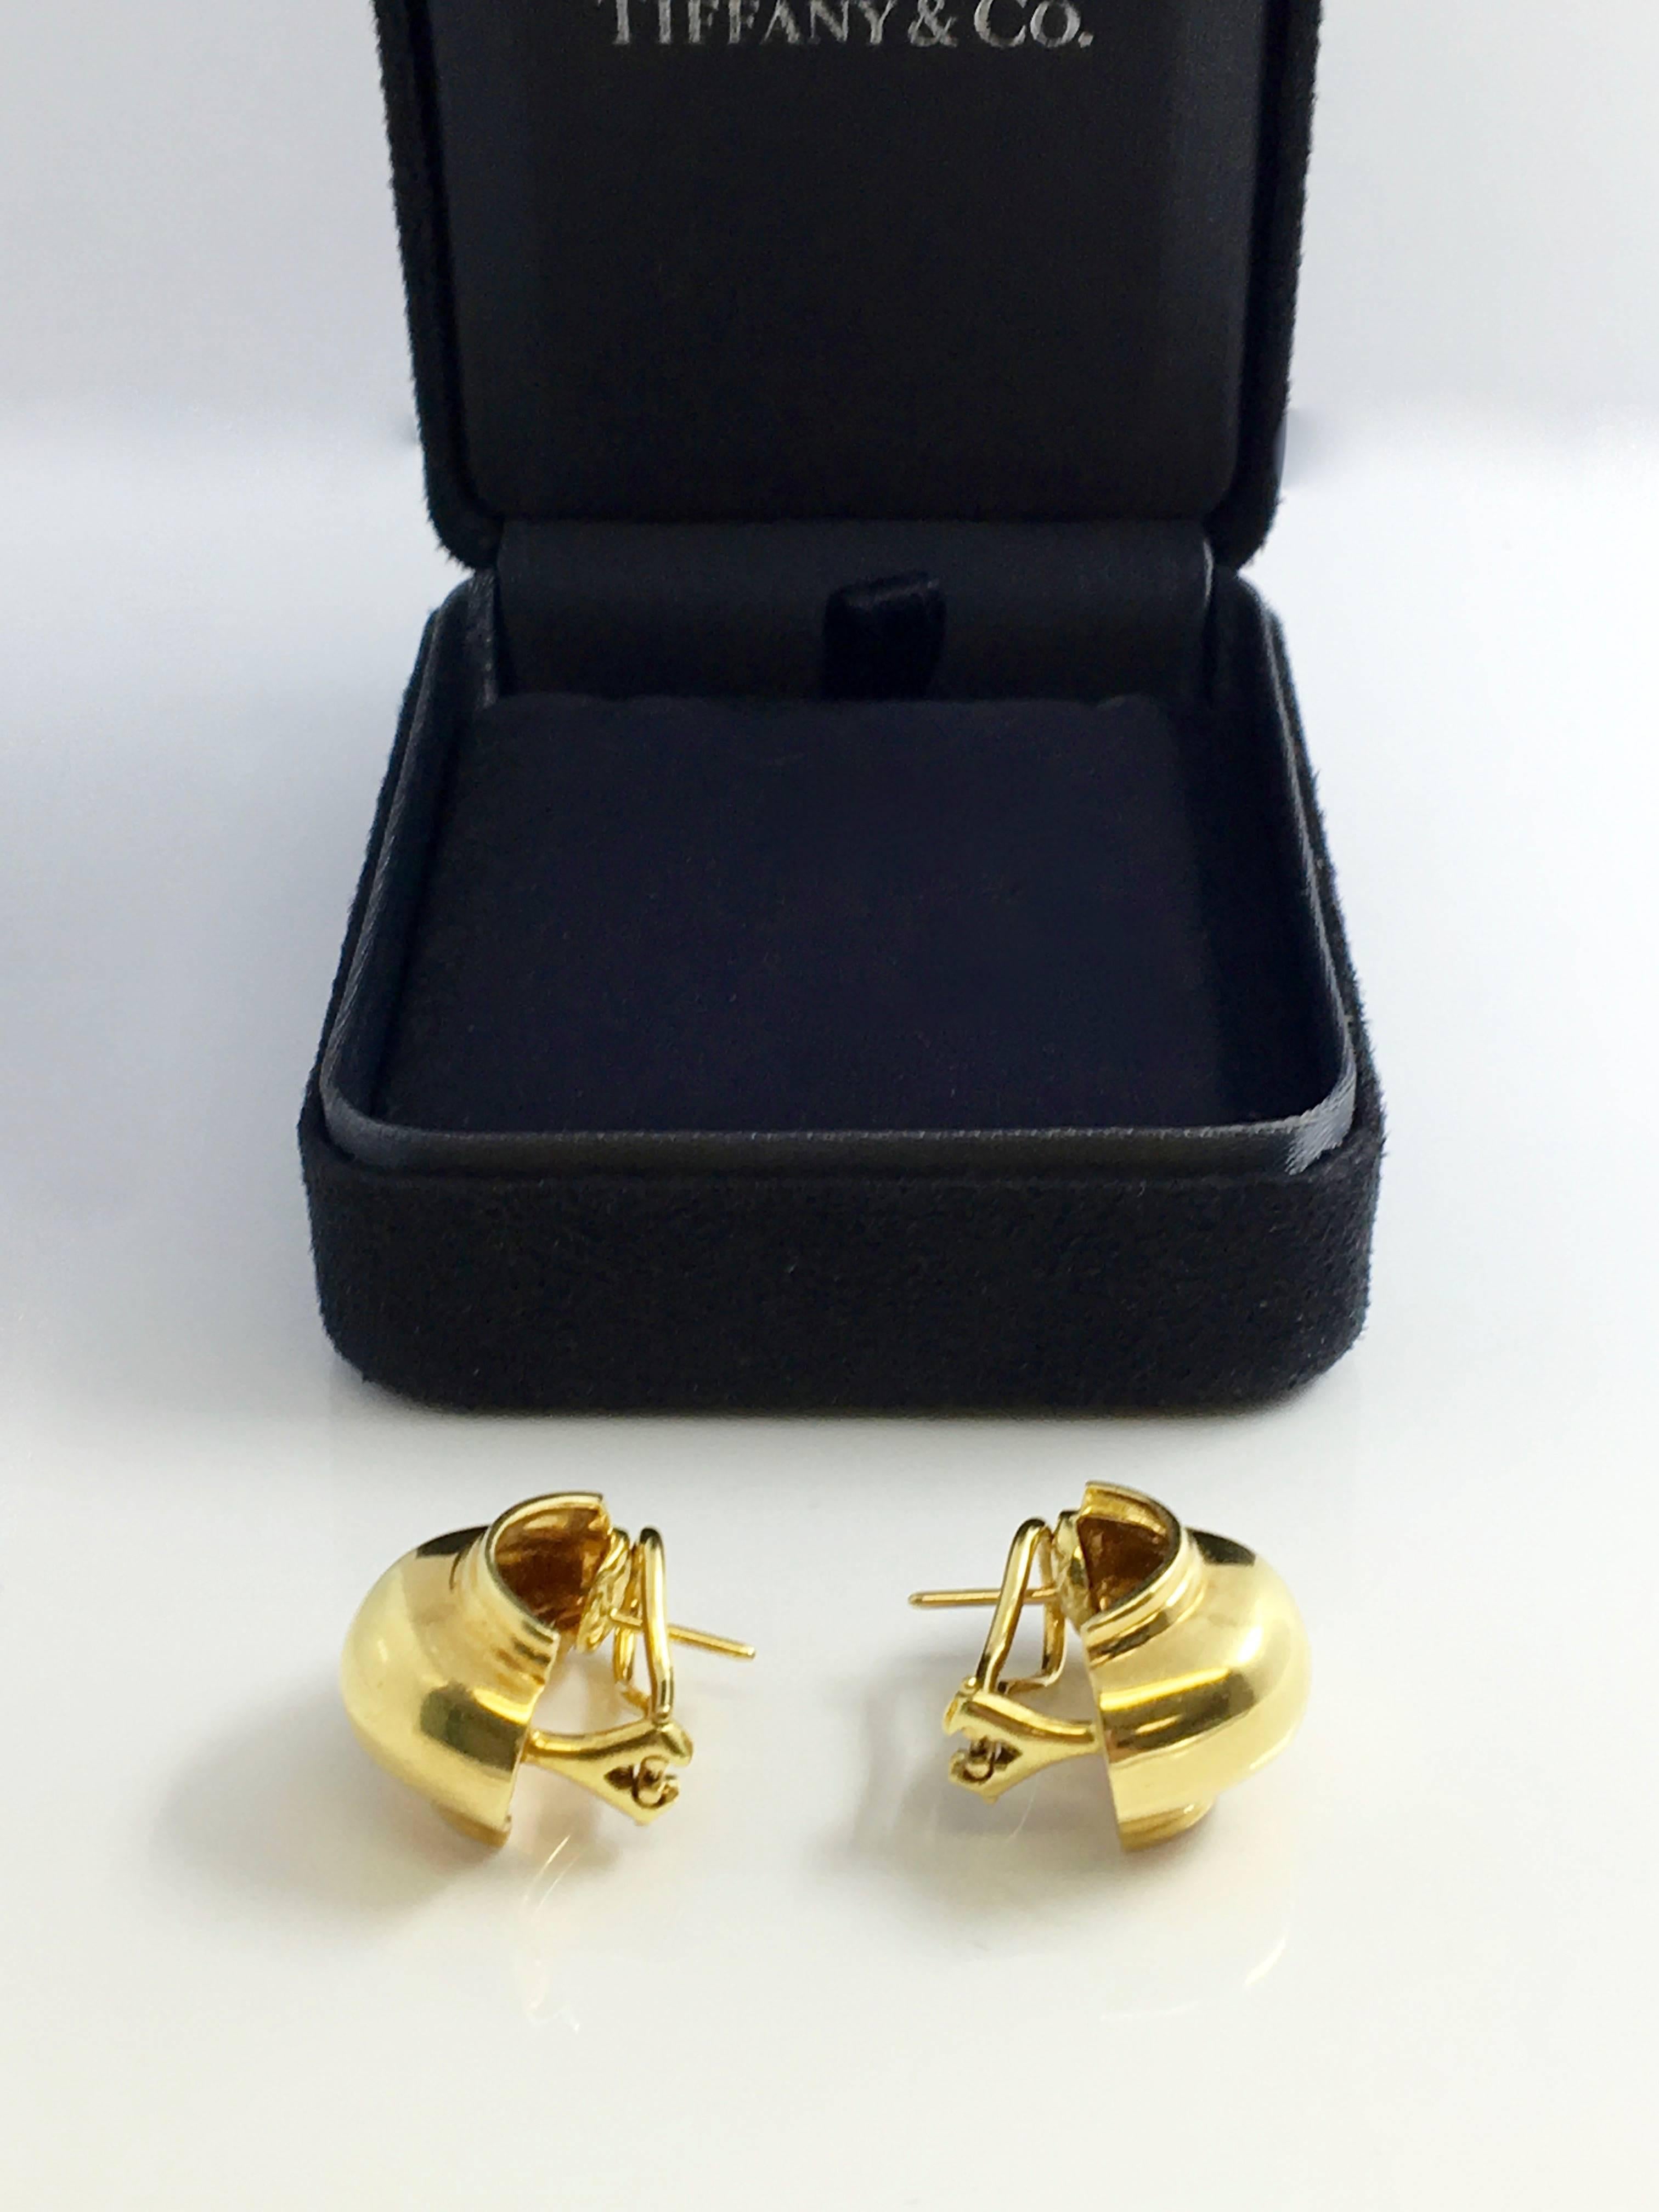 Tiffany & Co. Paloma Picasso 18k Gold Hoop Earrings Vintage 3